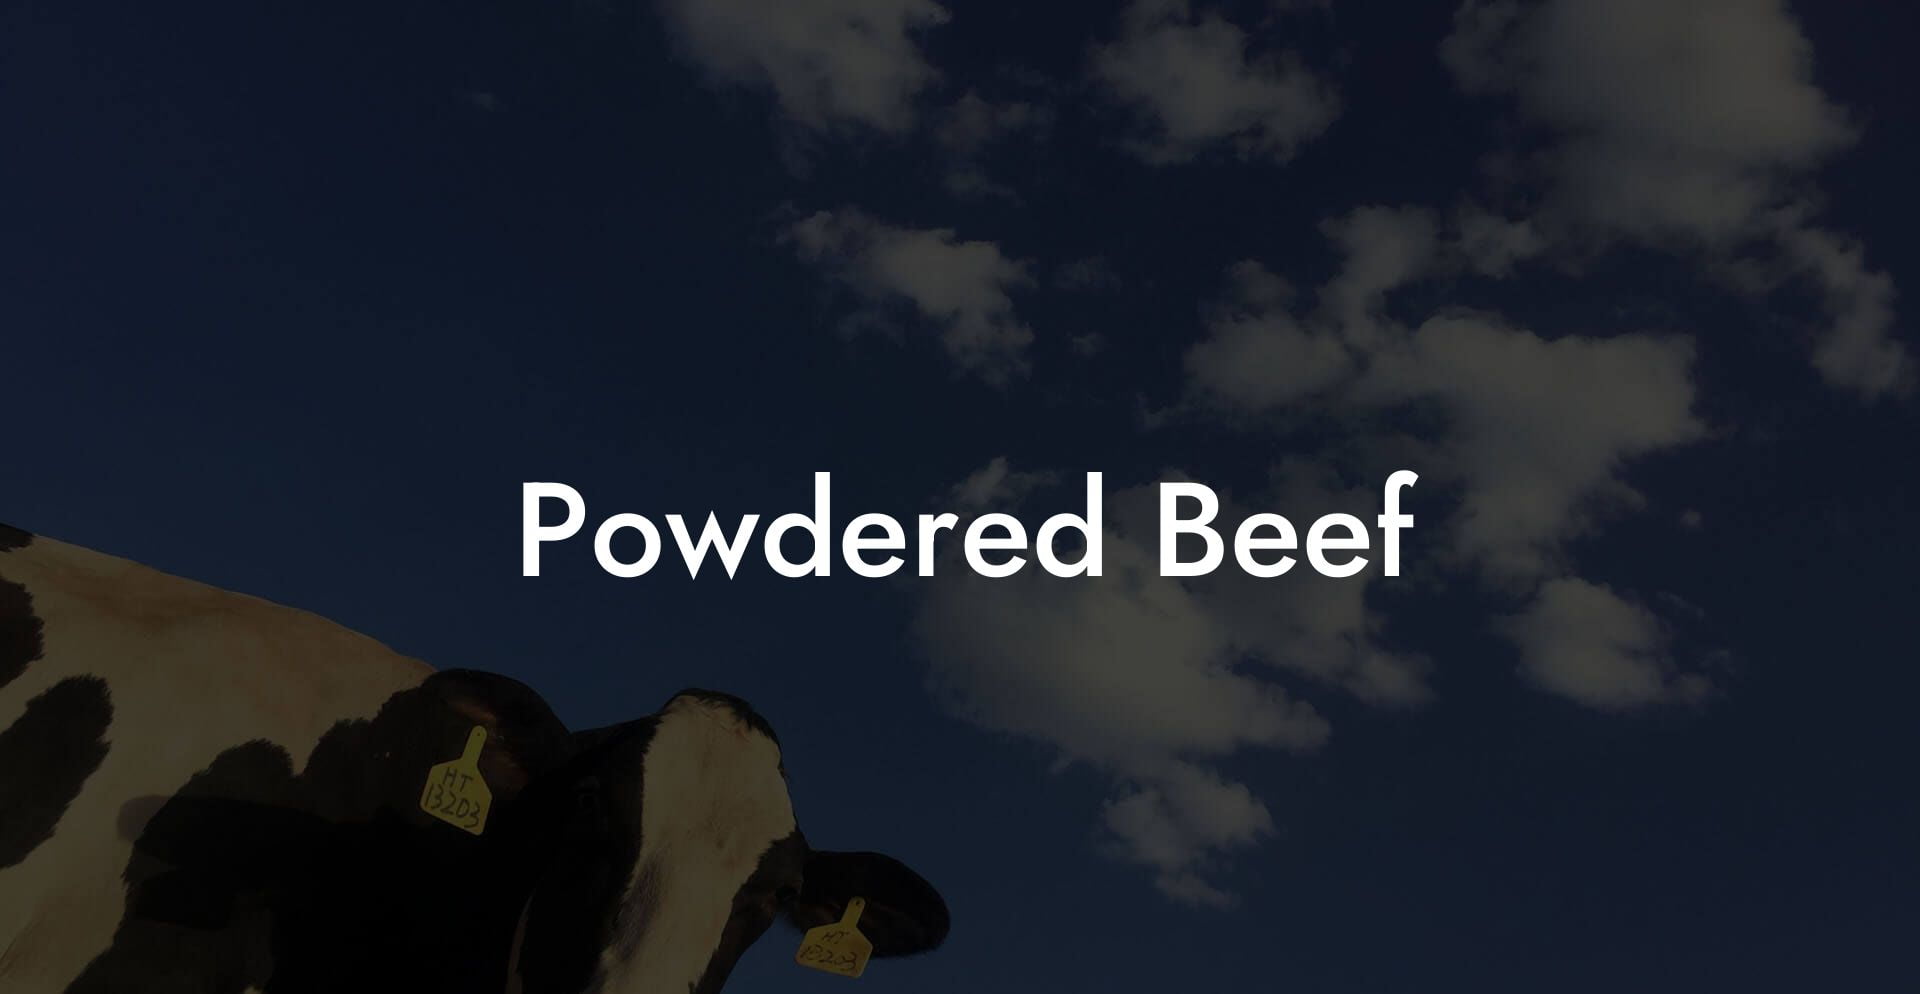 Powdered Beef